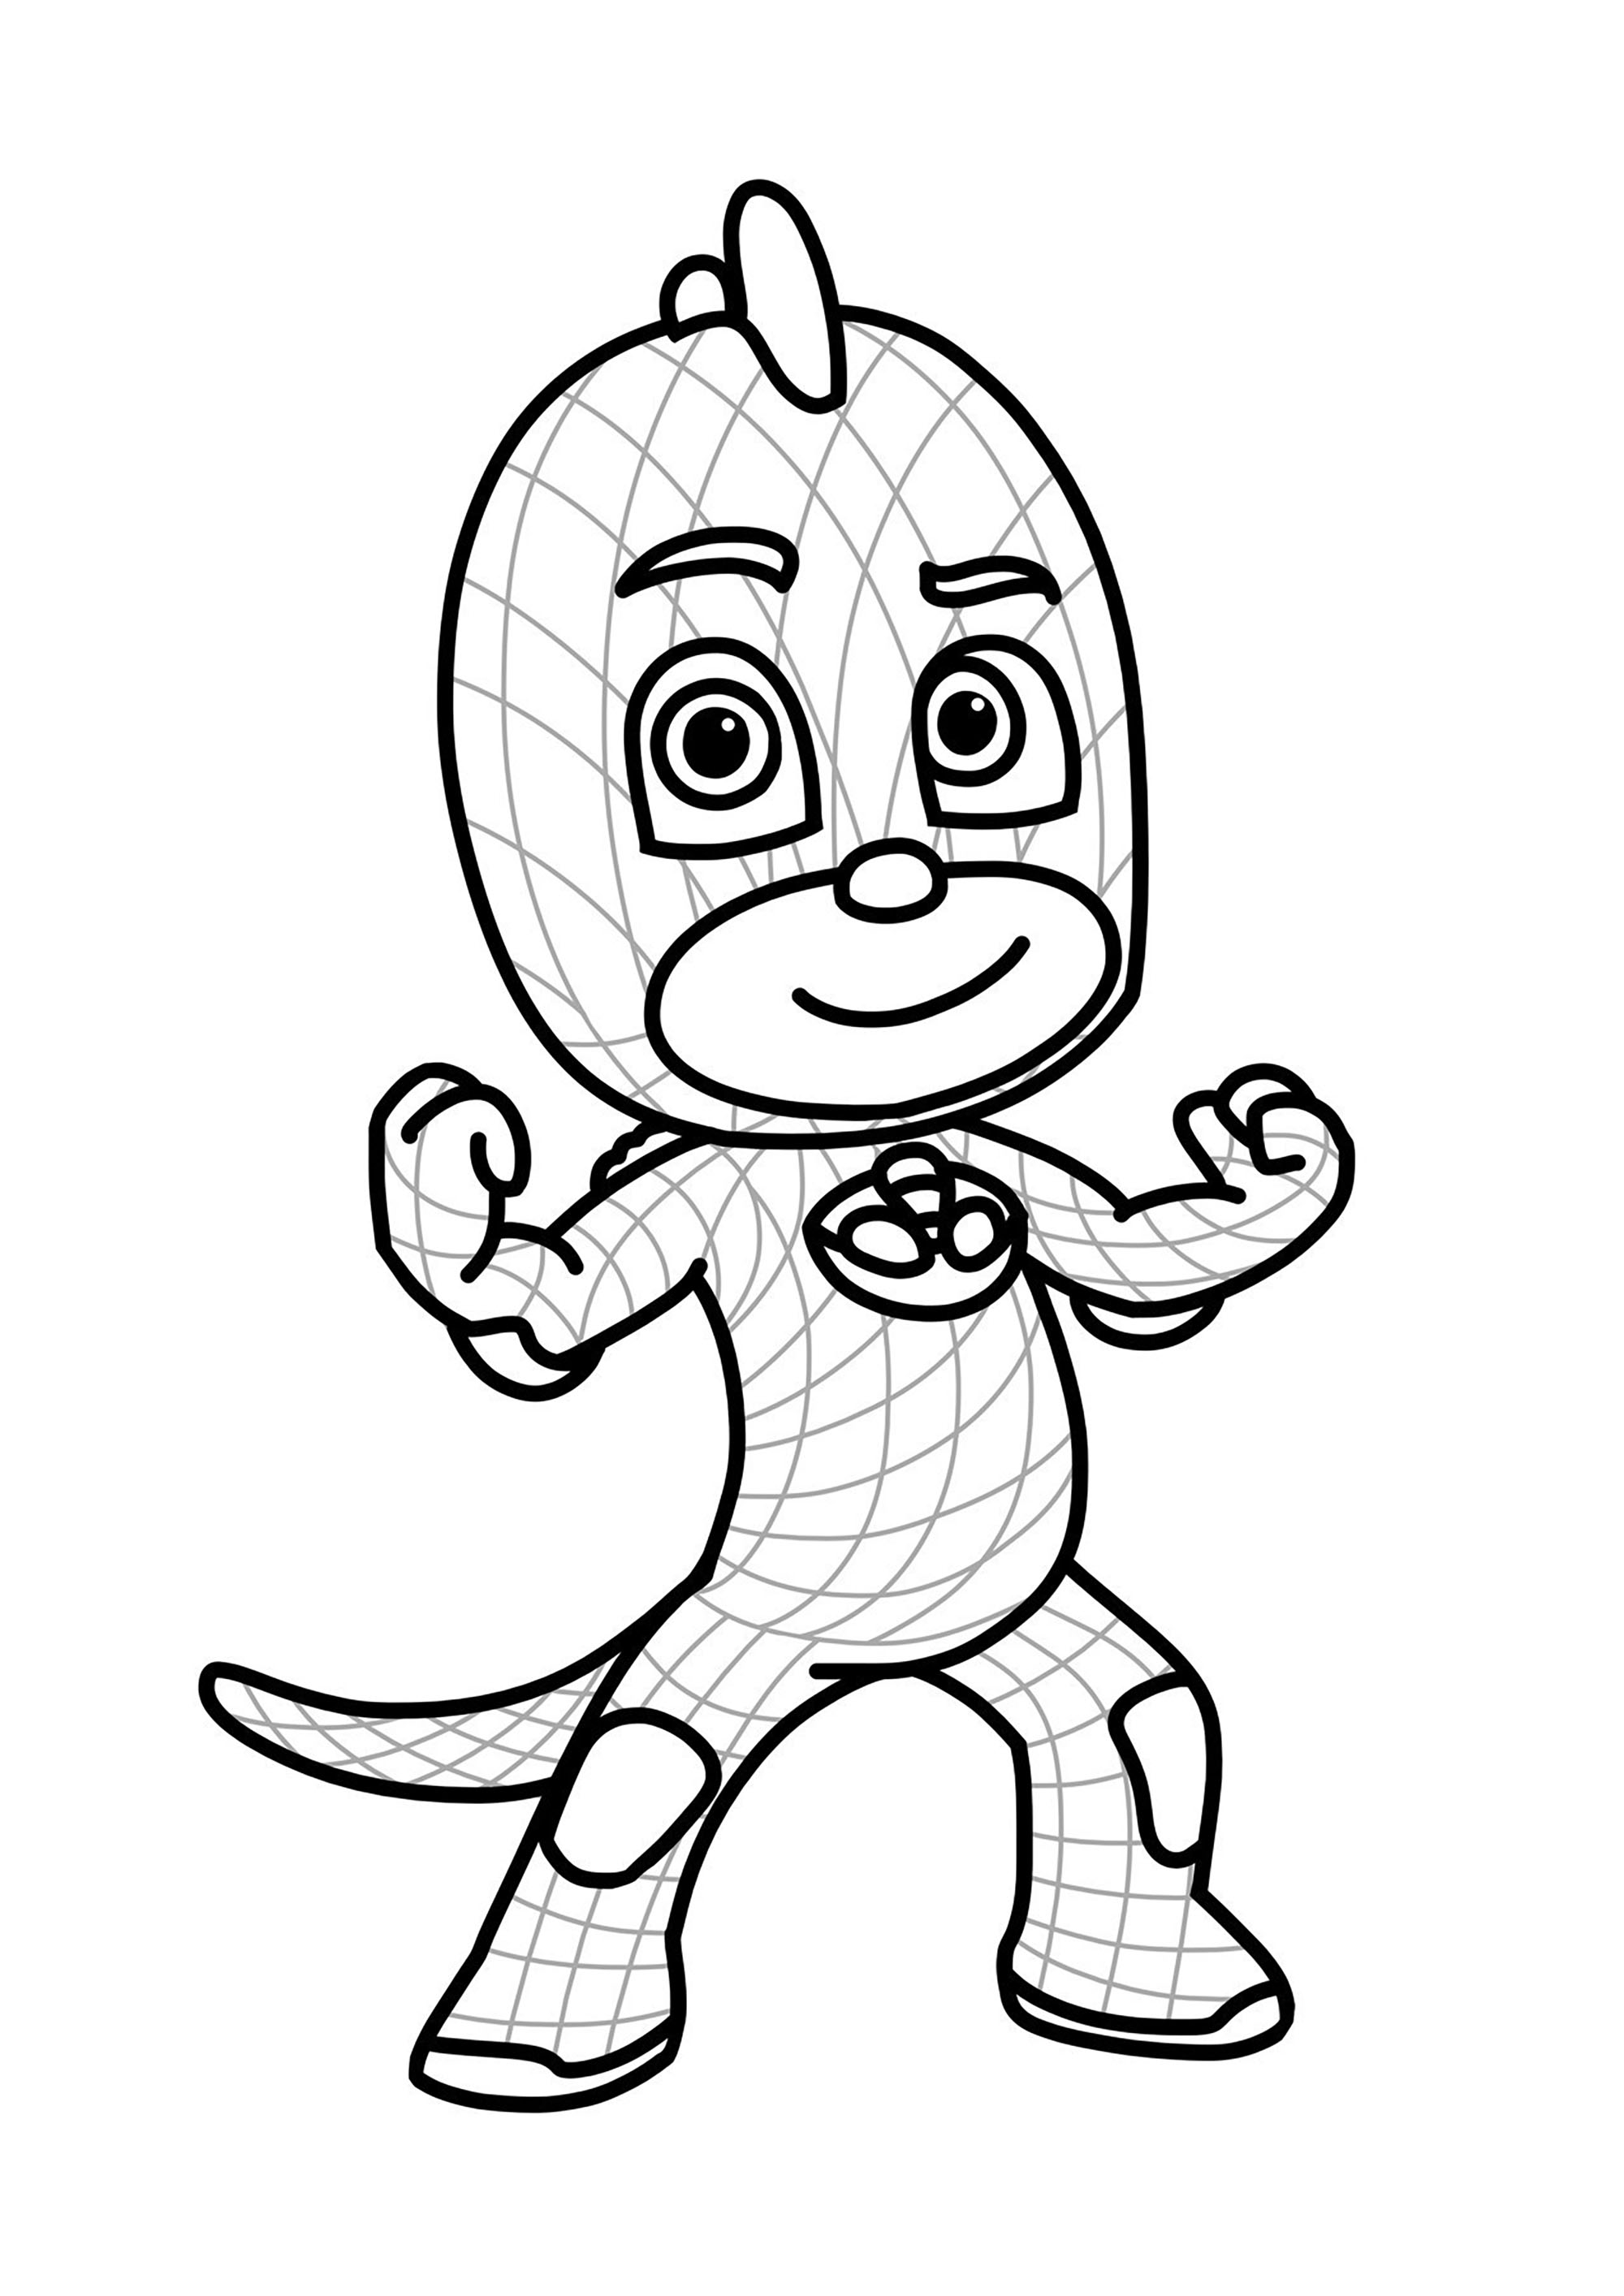 coloring page for kids pj masks free to color for children pj masks kids for coloring page kids 